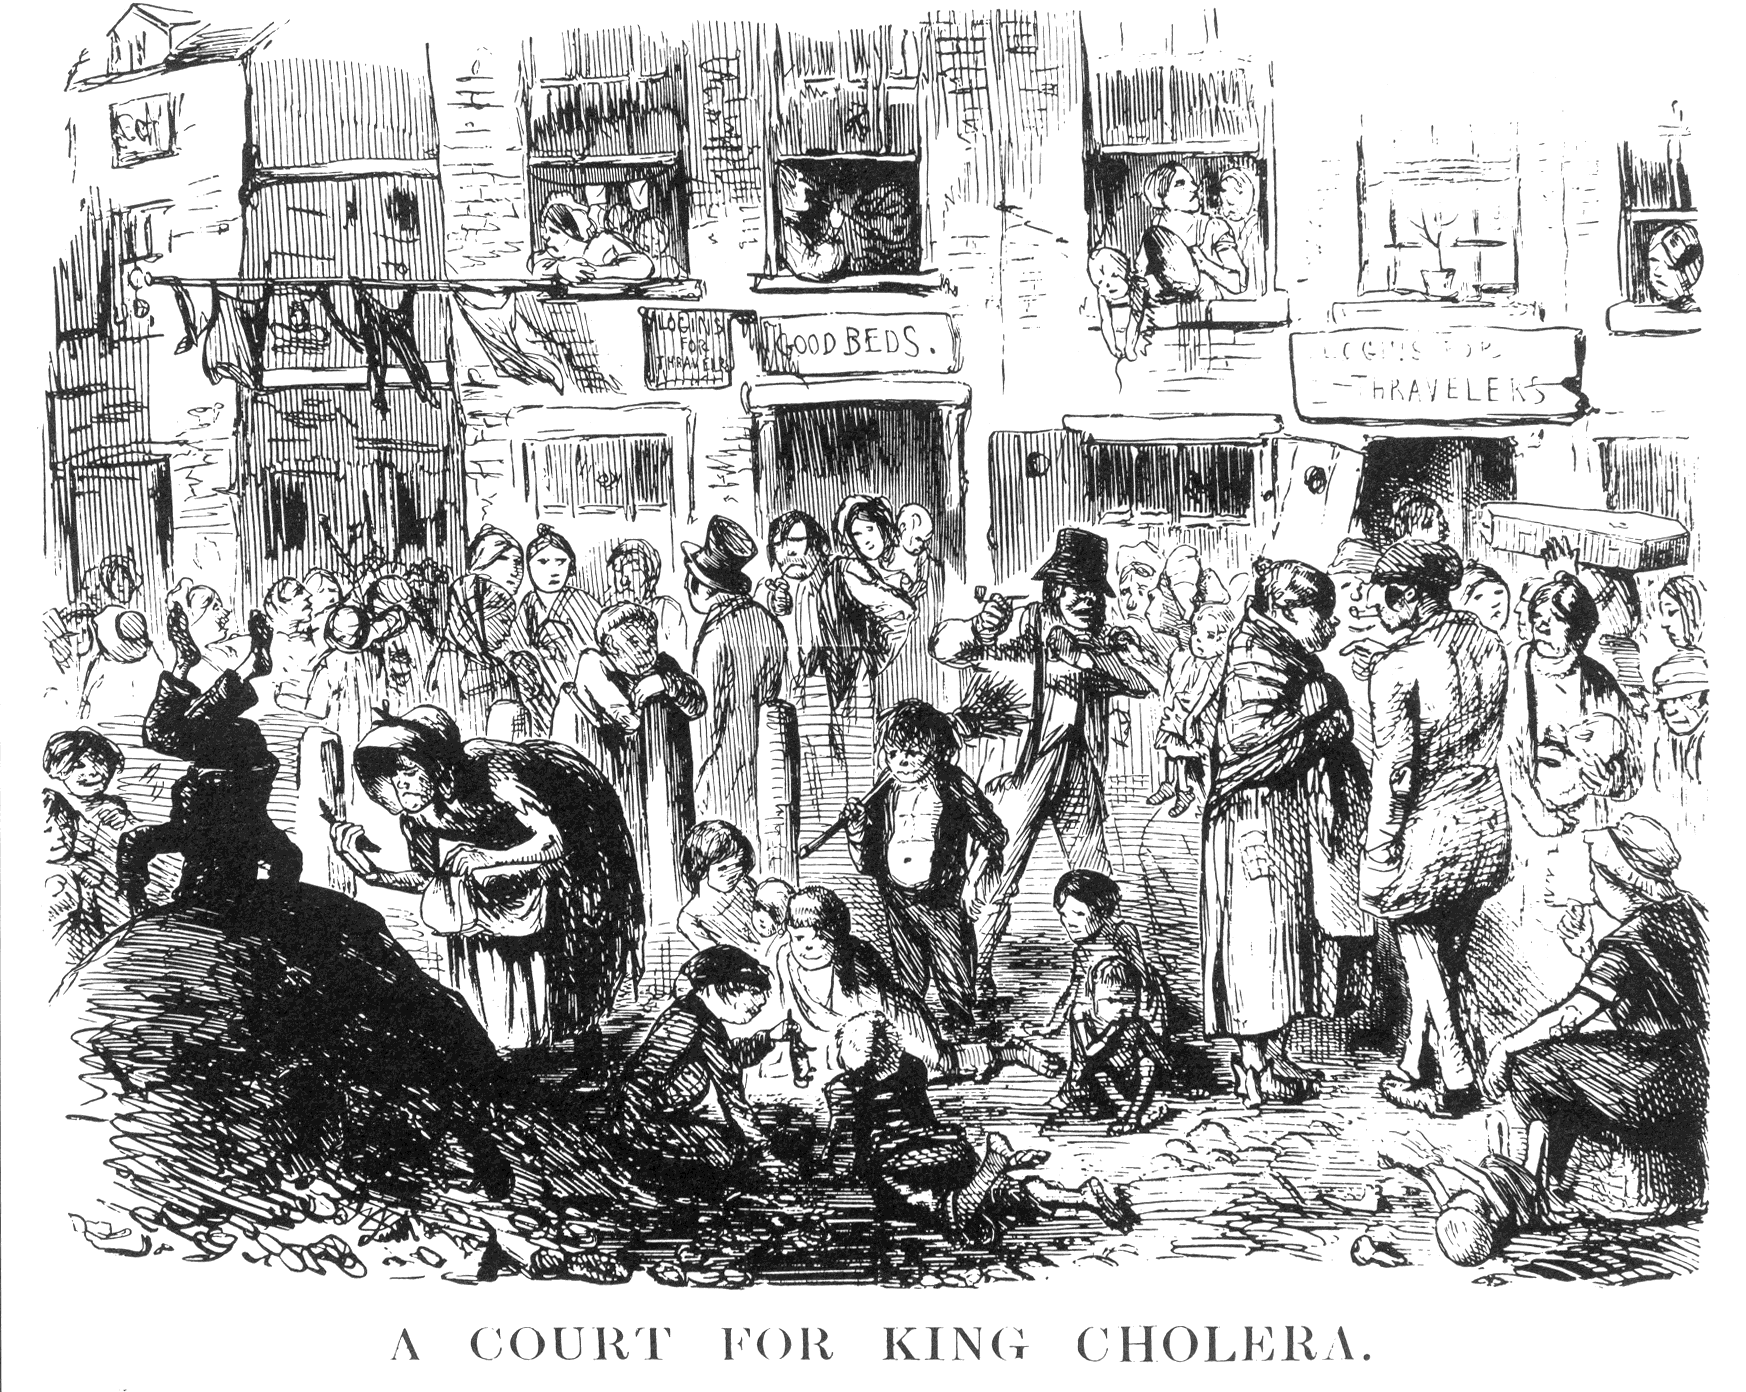 article18-19/Punch-A_Court_for_King_Cholera.png